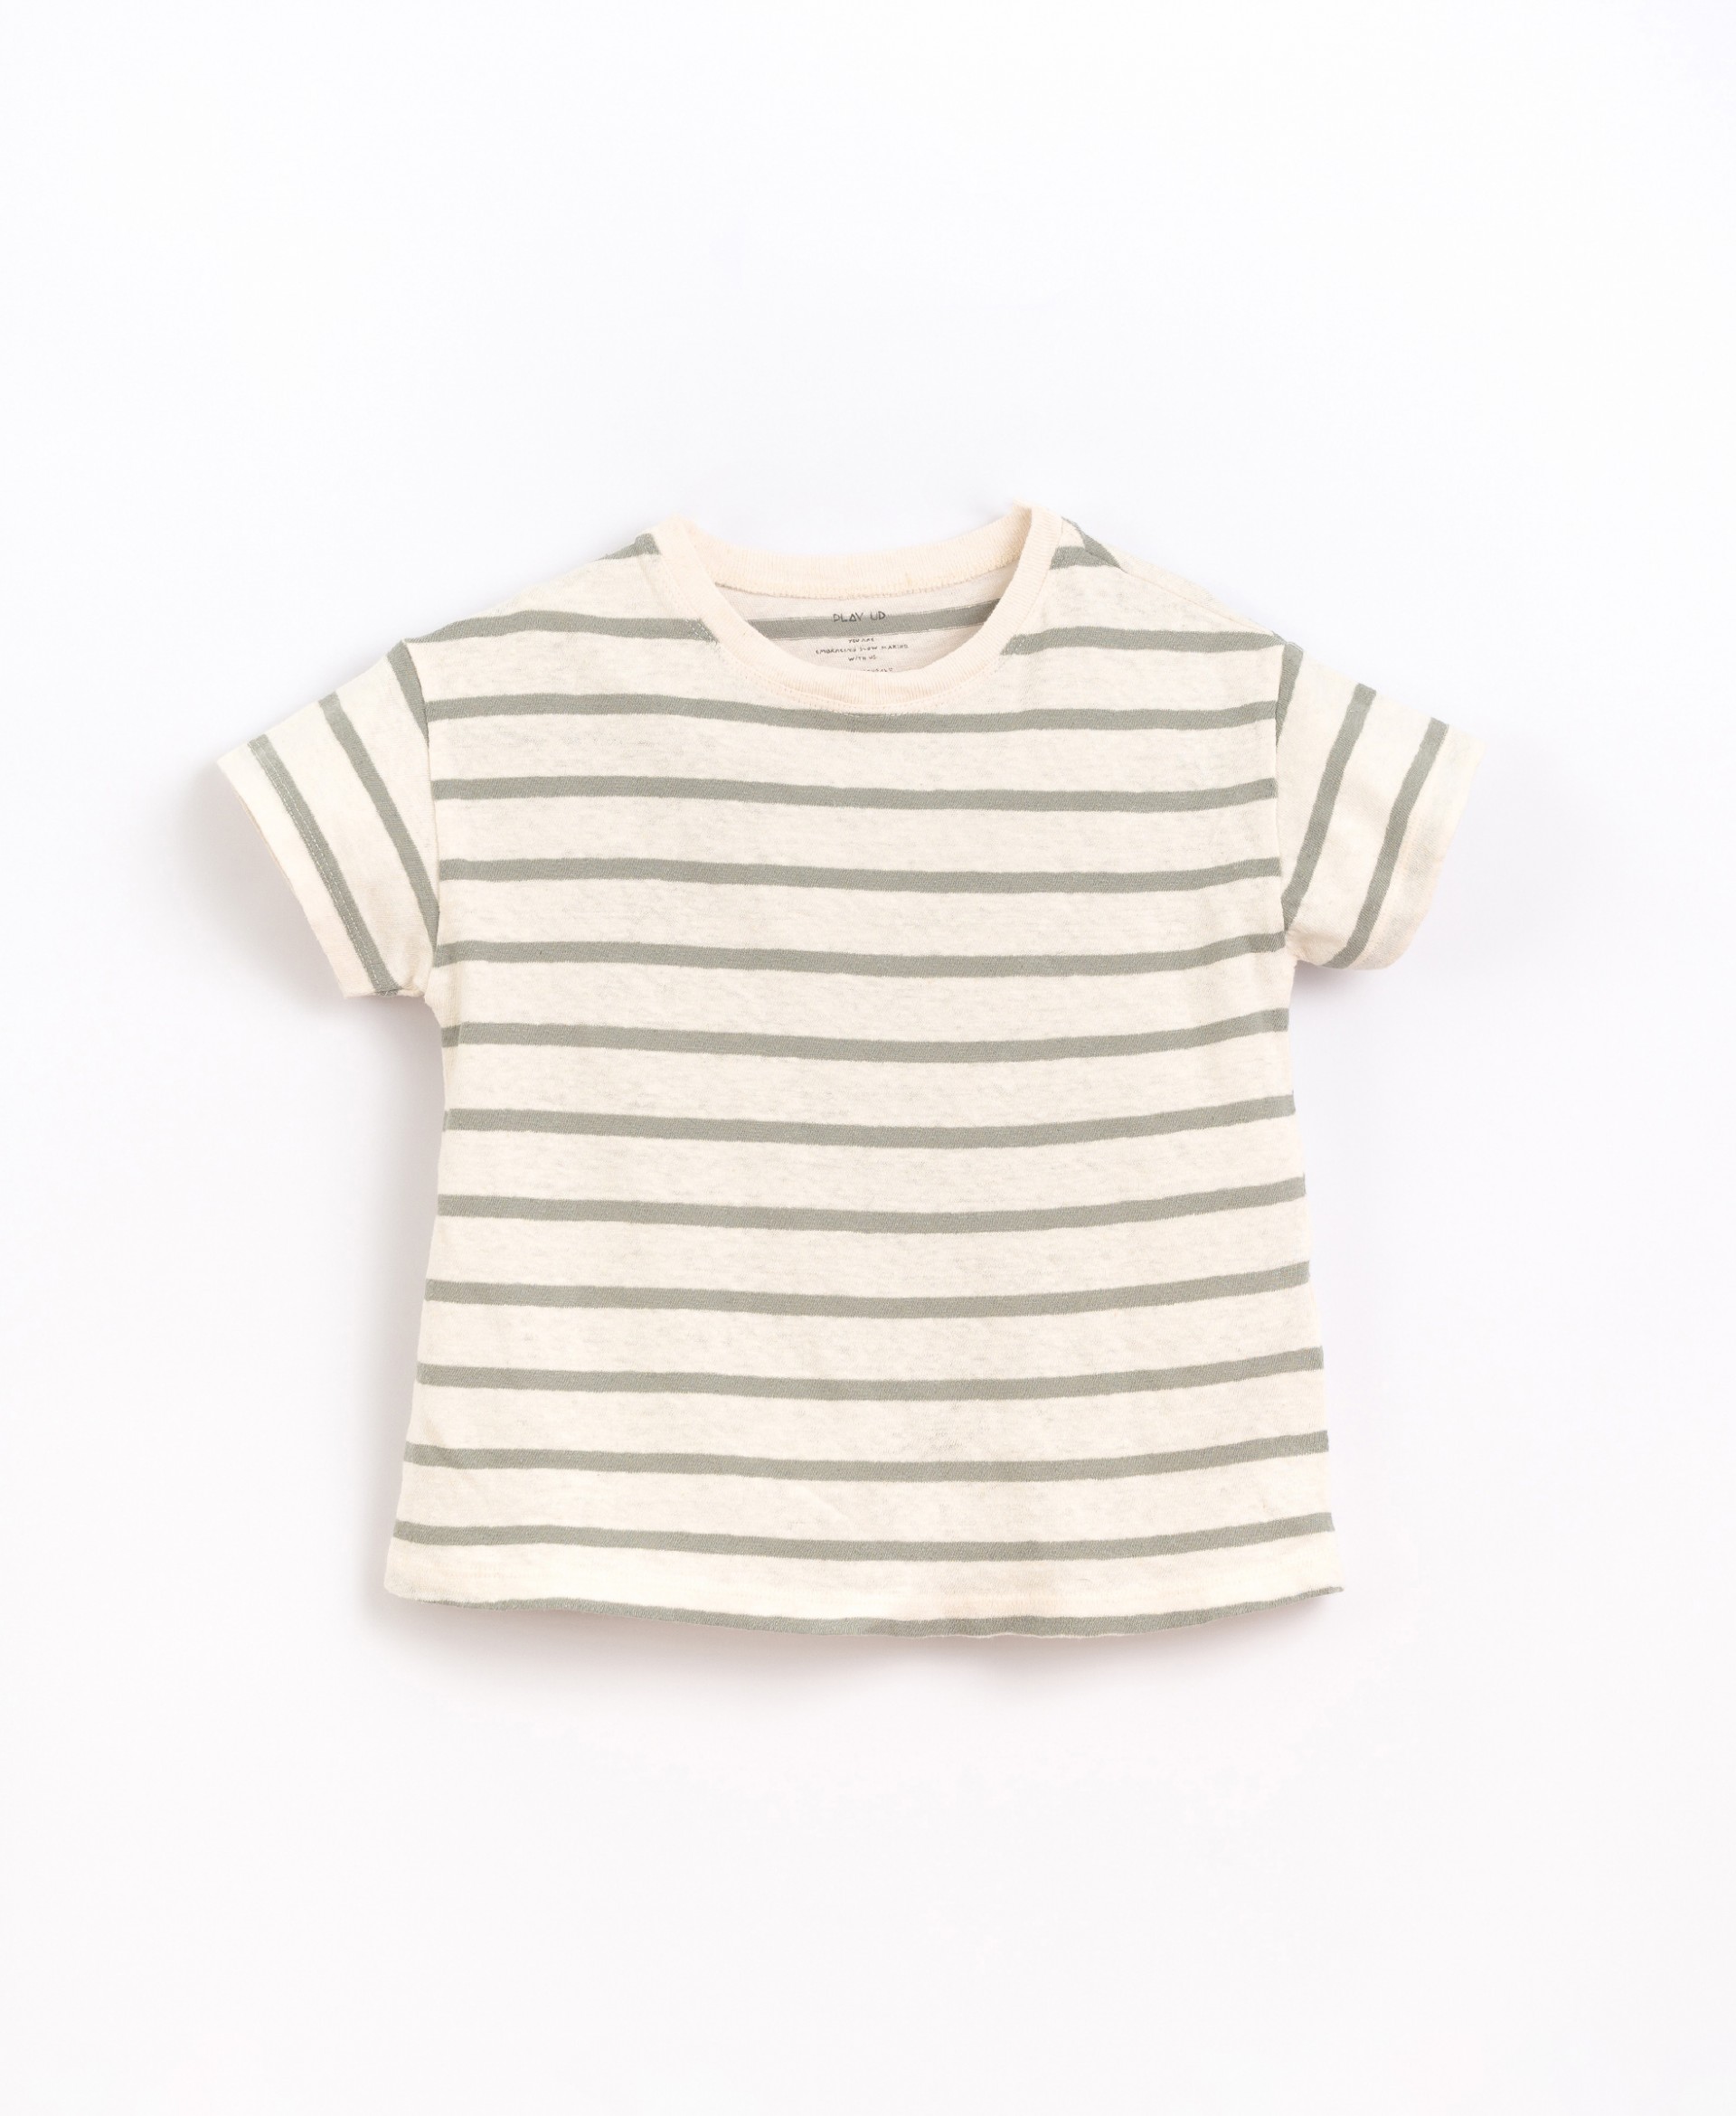 Striped t-shirt | Basketry